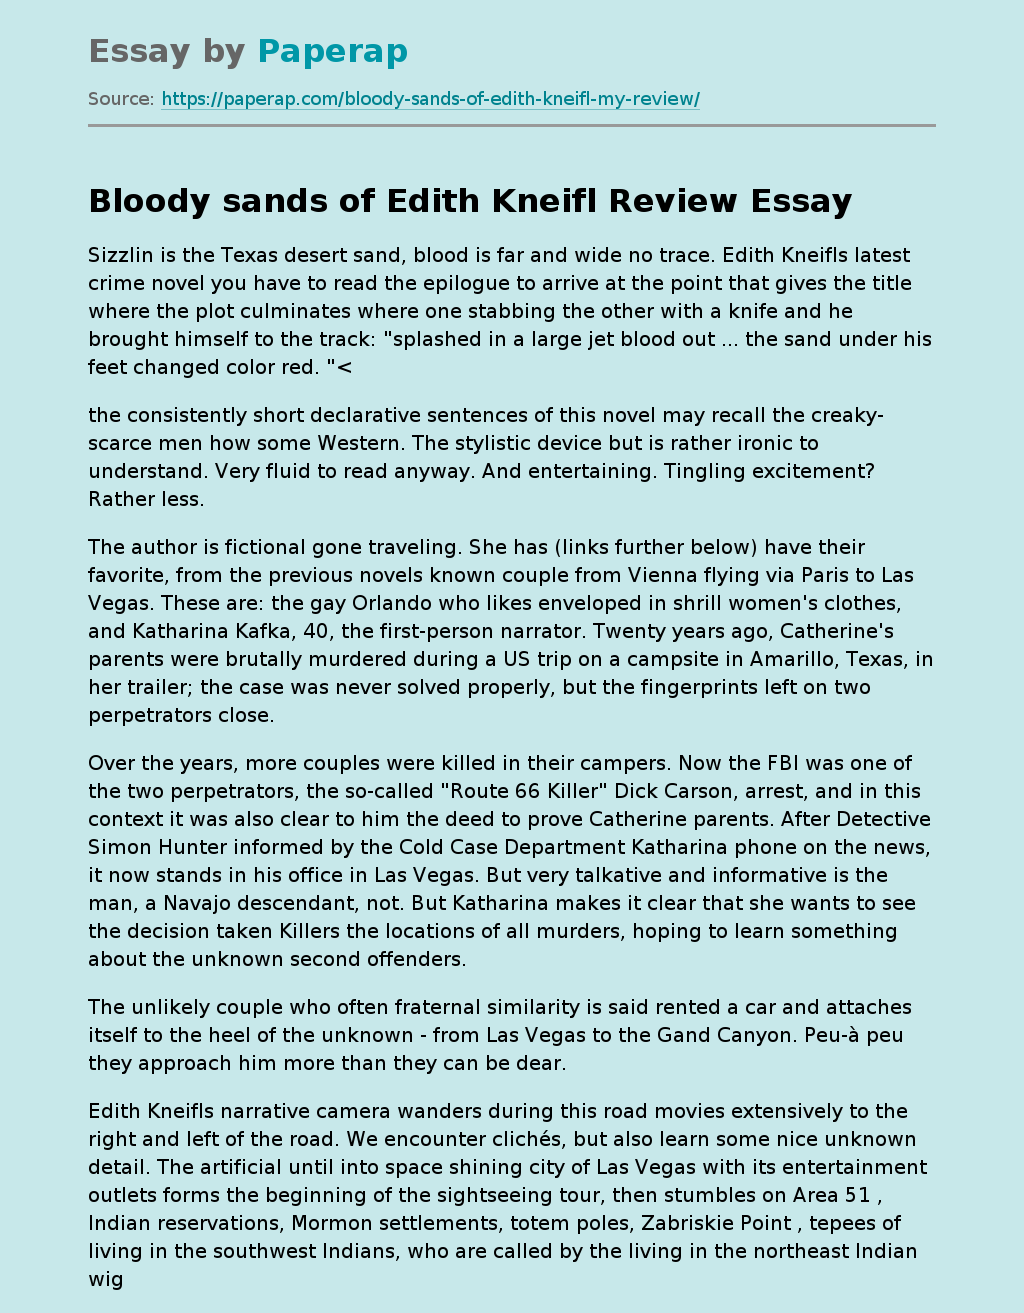 Bloody sands of Edith Kneifl Review